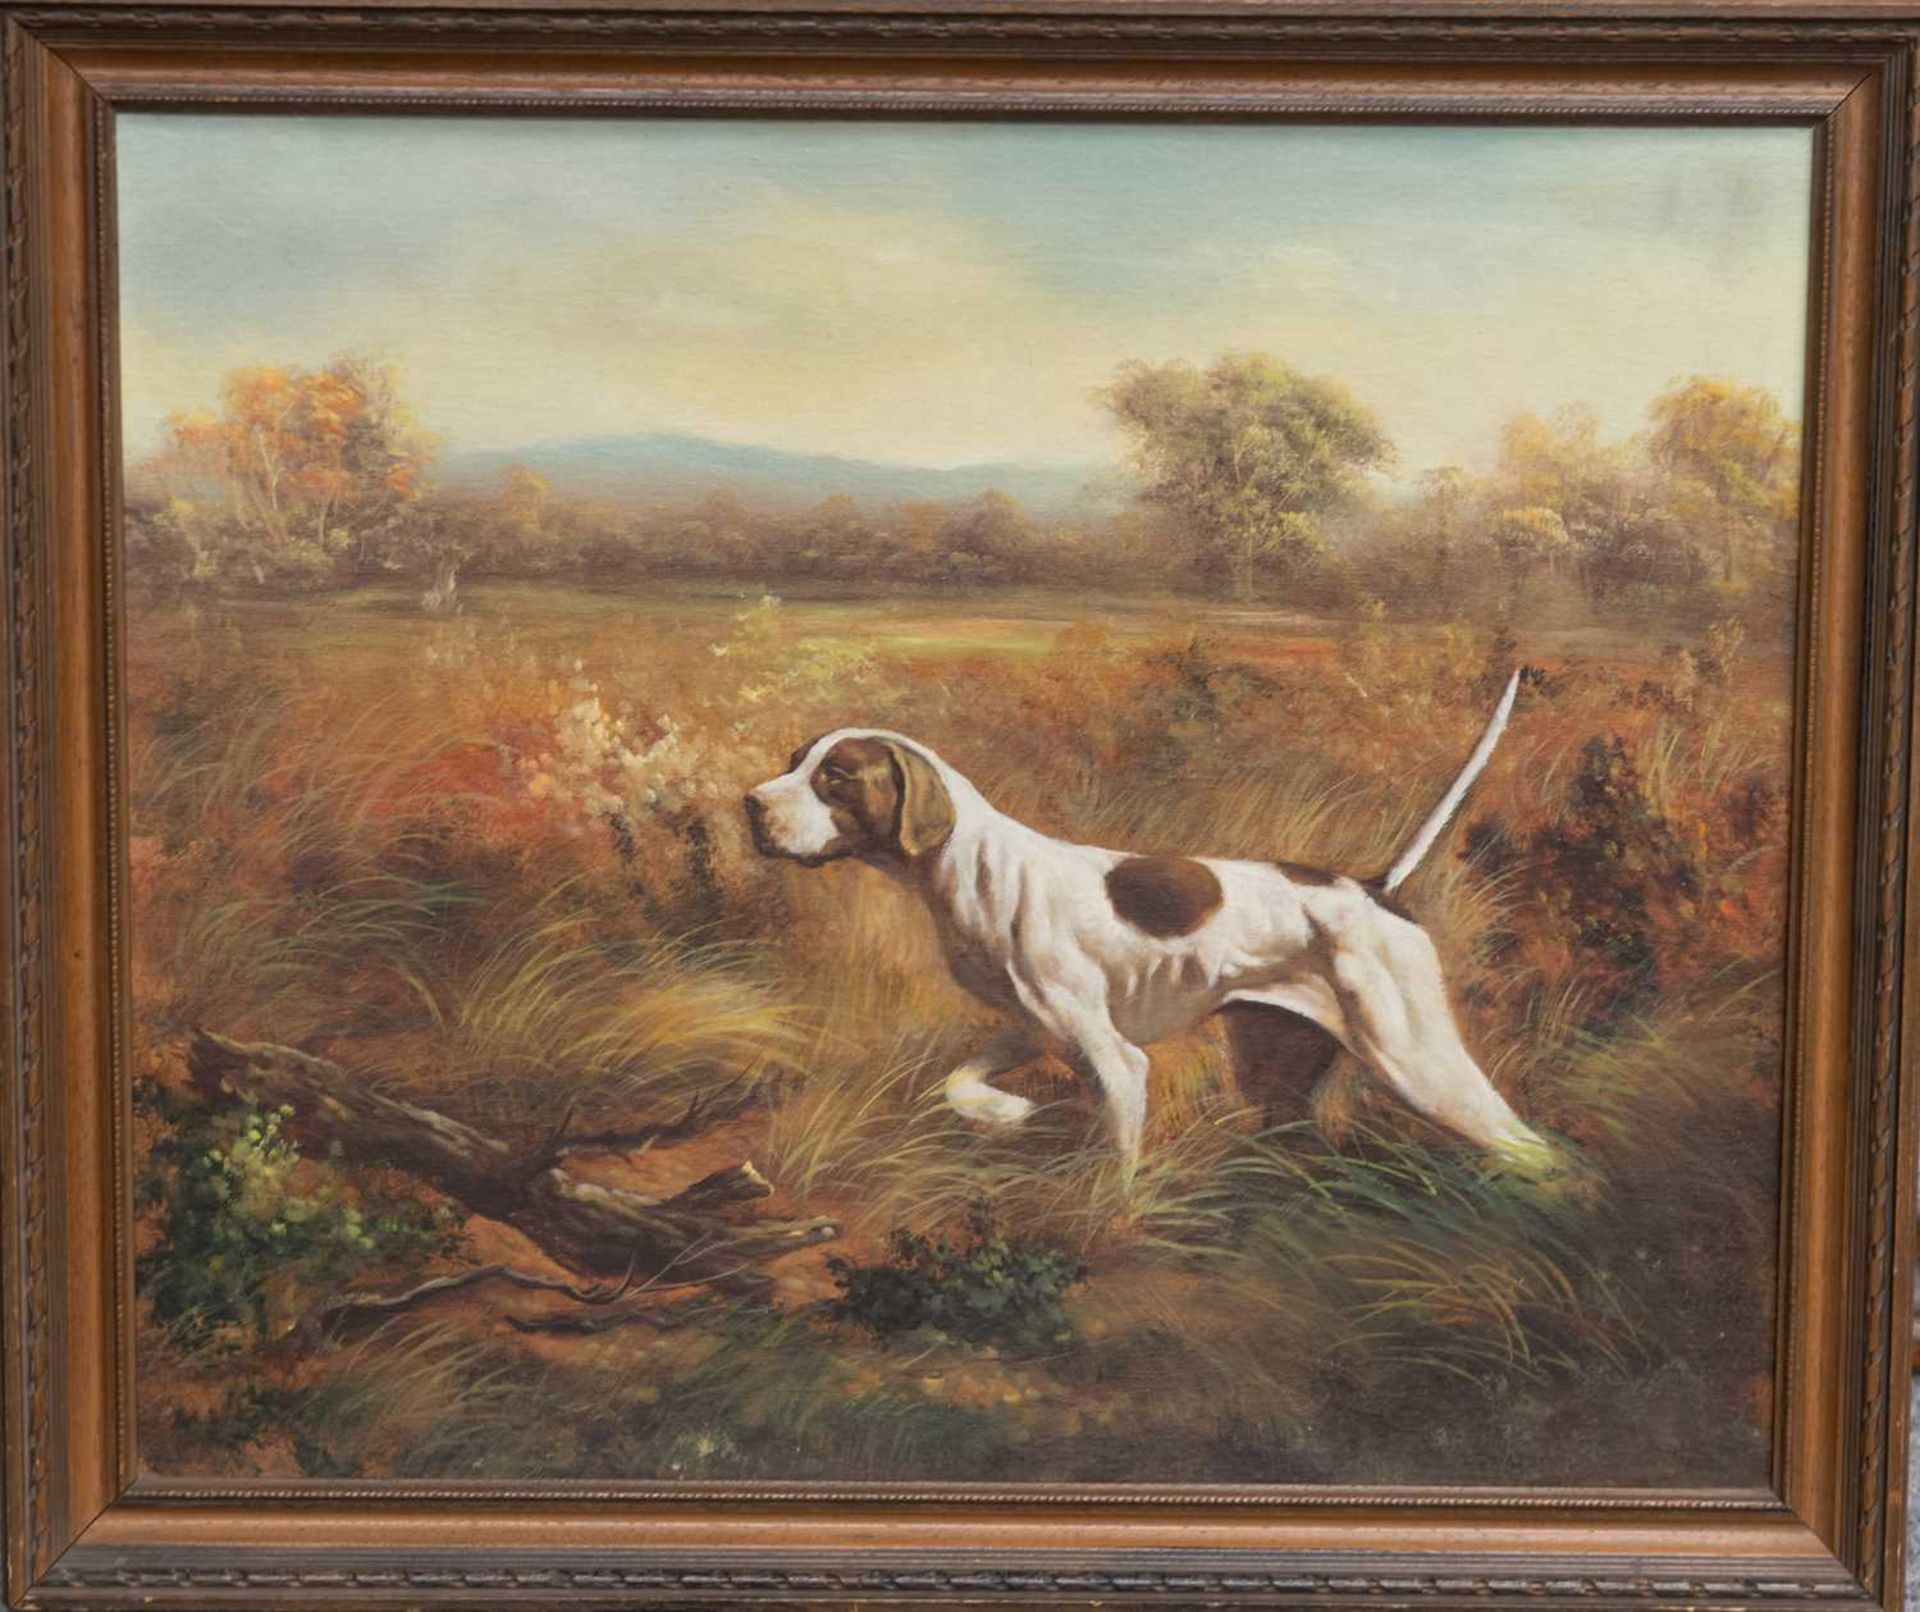 CLARE STOKES (MODERN) HOUND IN A LANDSCAPE - Image 2 of 2